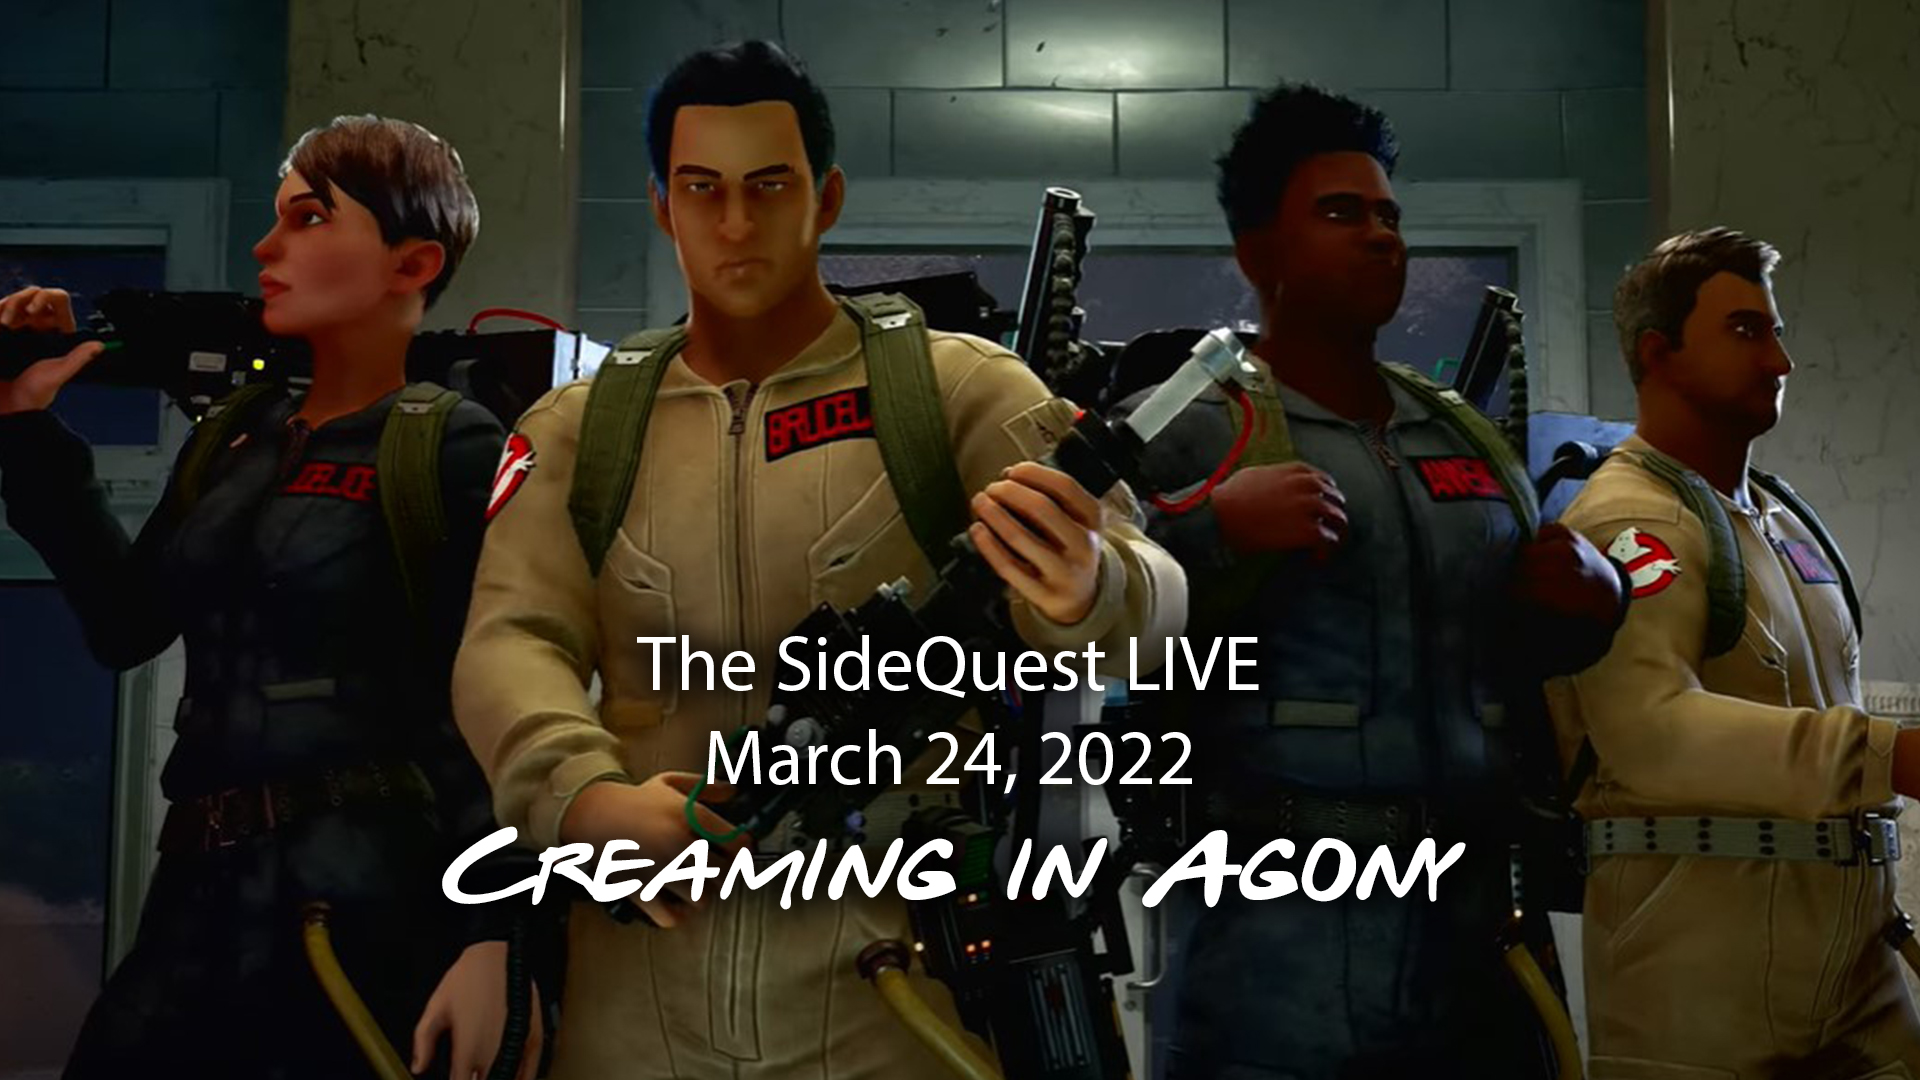 The SideQuest LIVE March 24, 2022: Creaming in Agony